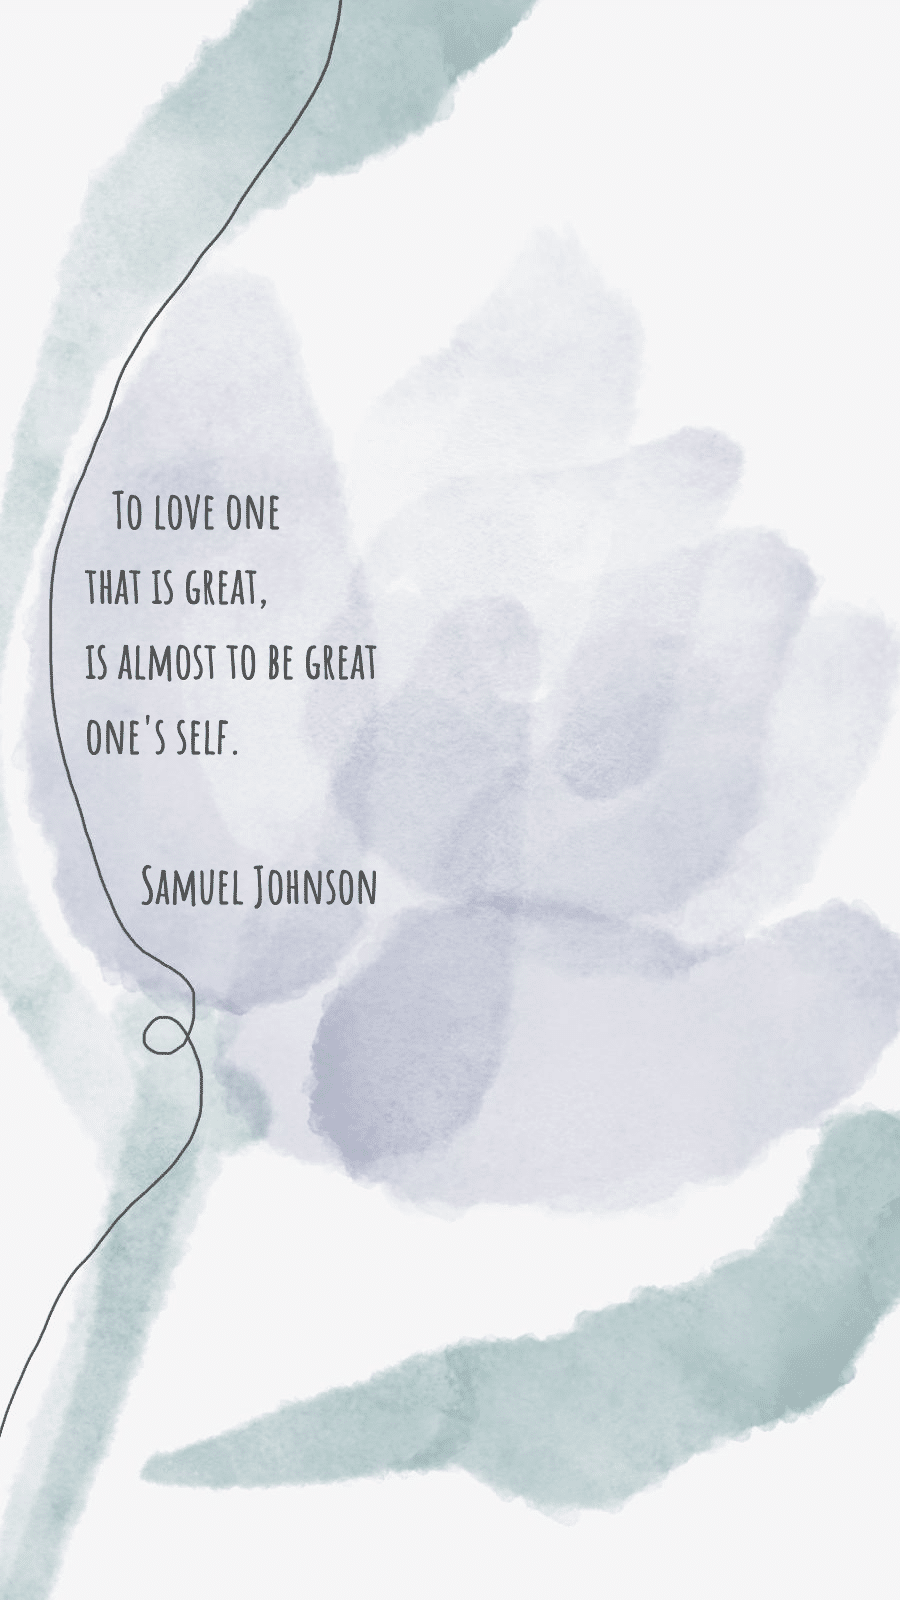 Simple Literary Hand Painted Line Watercolor Text Quotes Instagram Story预览效果